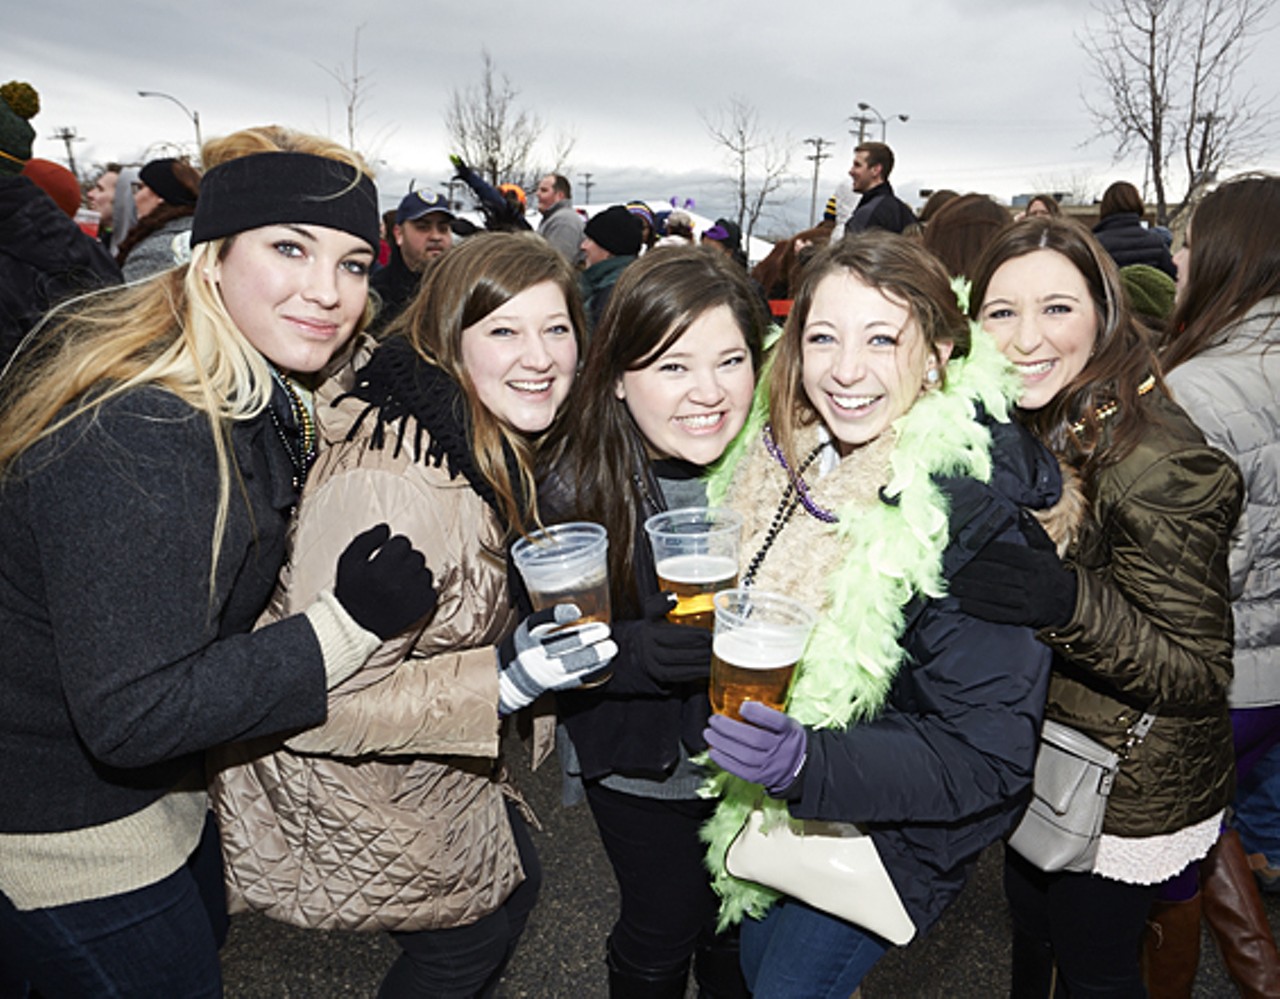 Randle Caldwell, Anna Knaup, Kimmie Barrett, Kelly Litzelfelner, and Ashley Carnoali enjoy the cold beer and even colder weather.